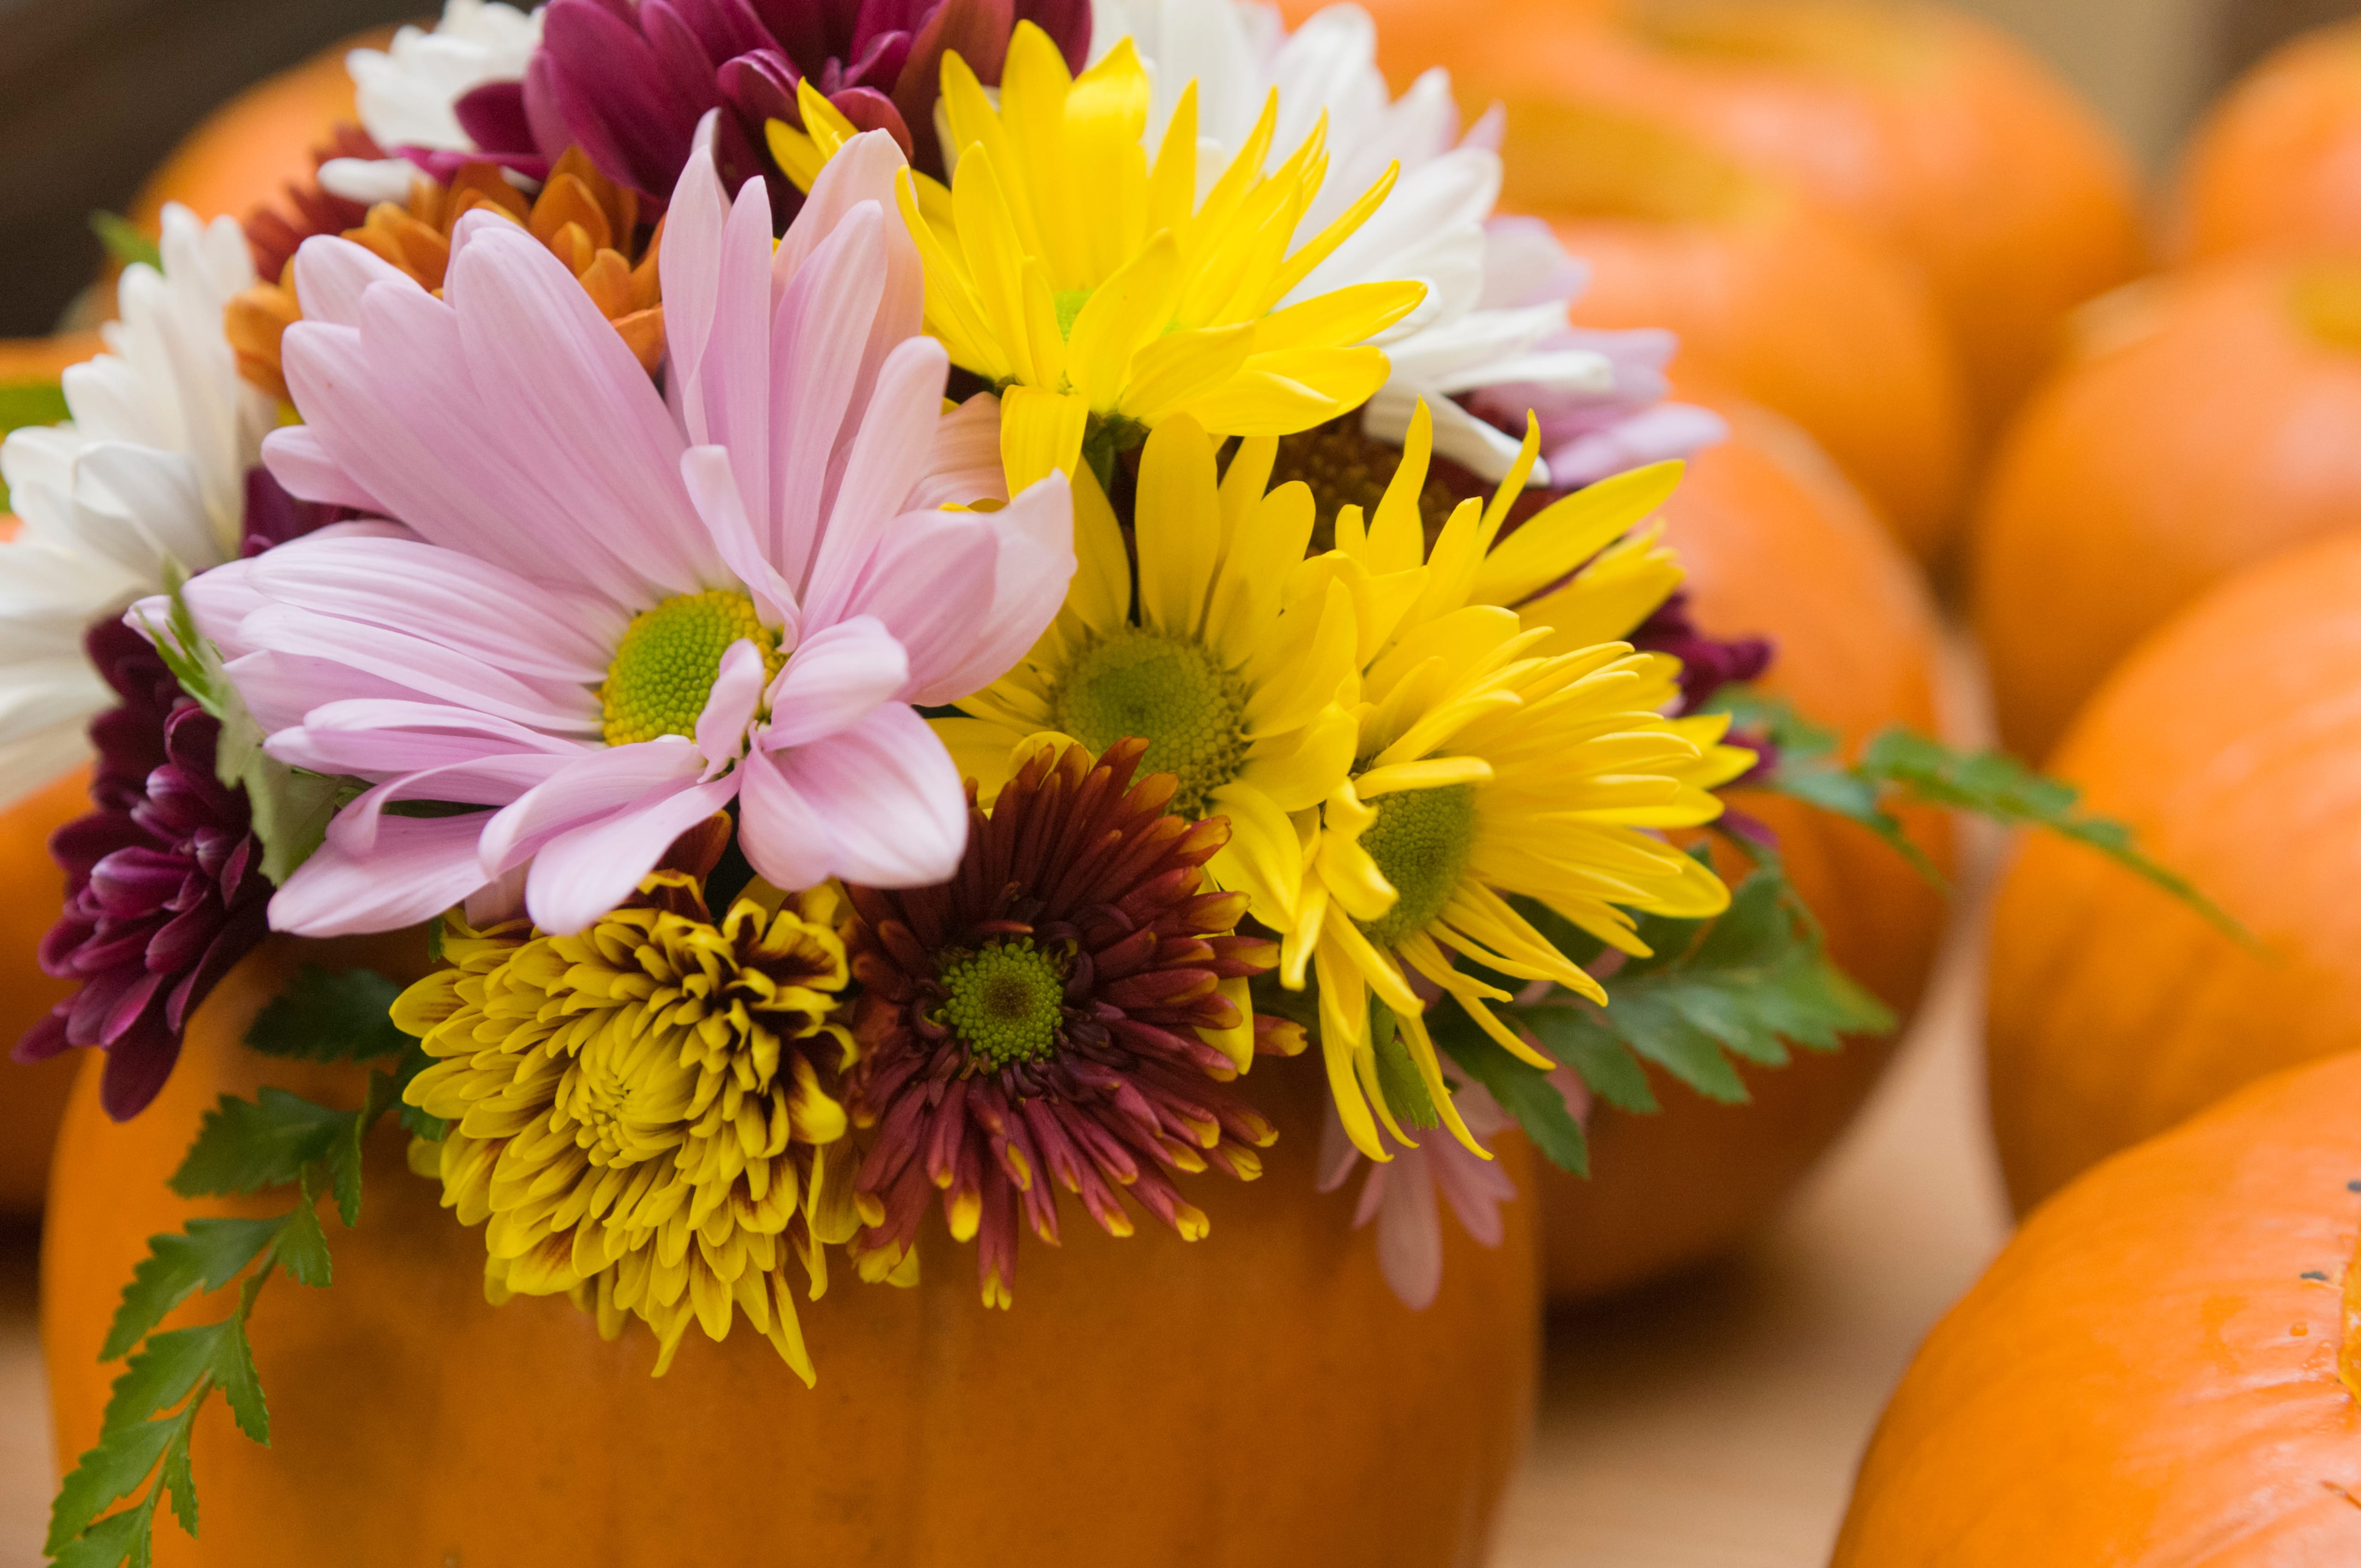 Fall Harvest Activities for Horticultural Therapy | Chicago Botanic Garden